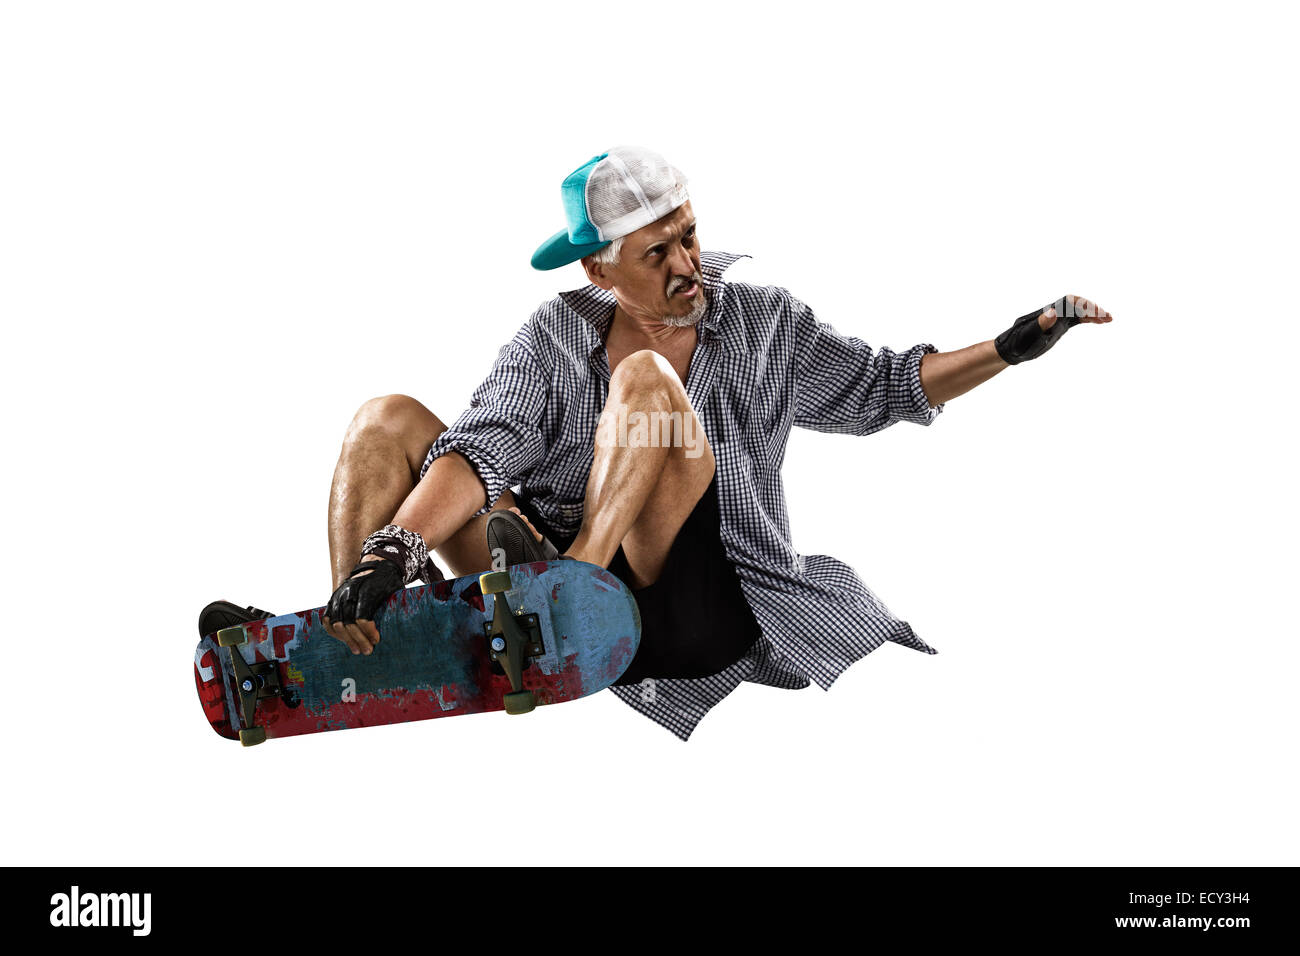 The isolated old man skater Stock Photo